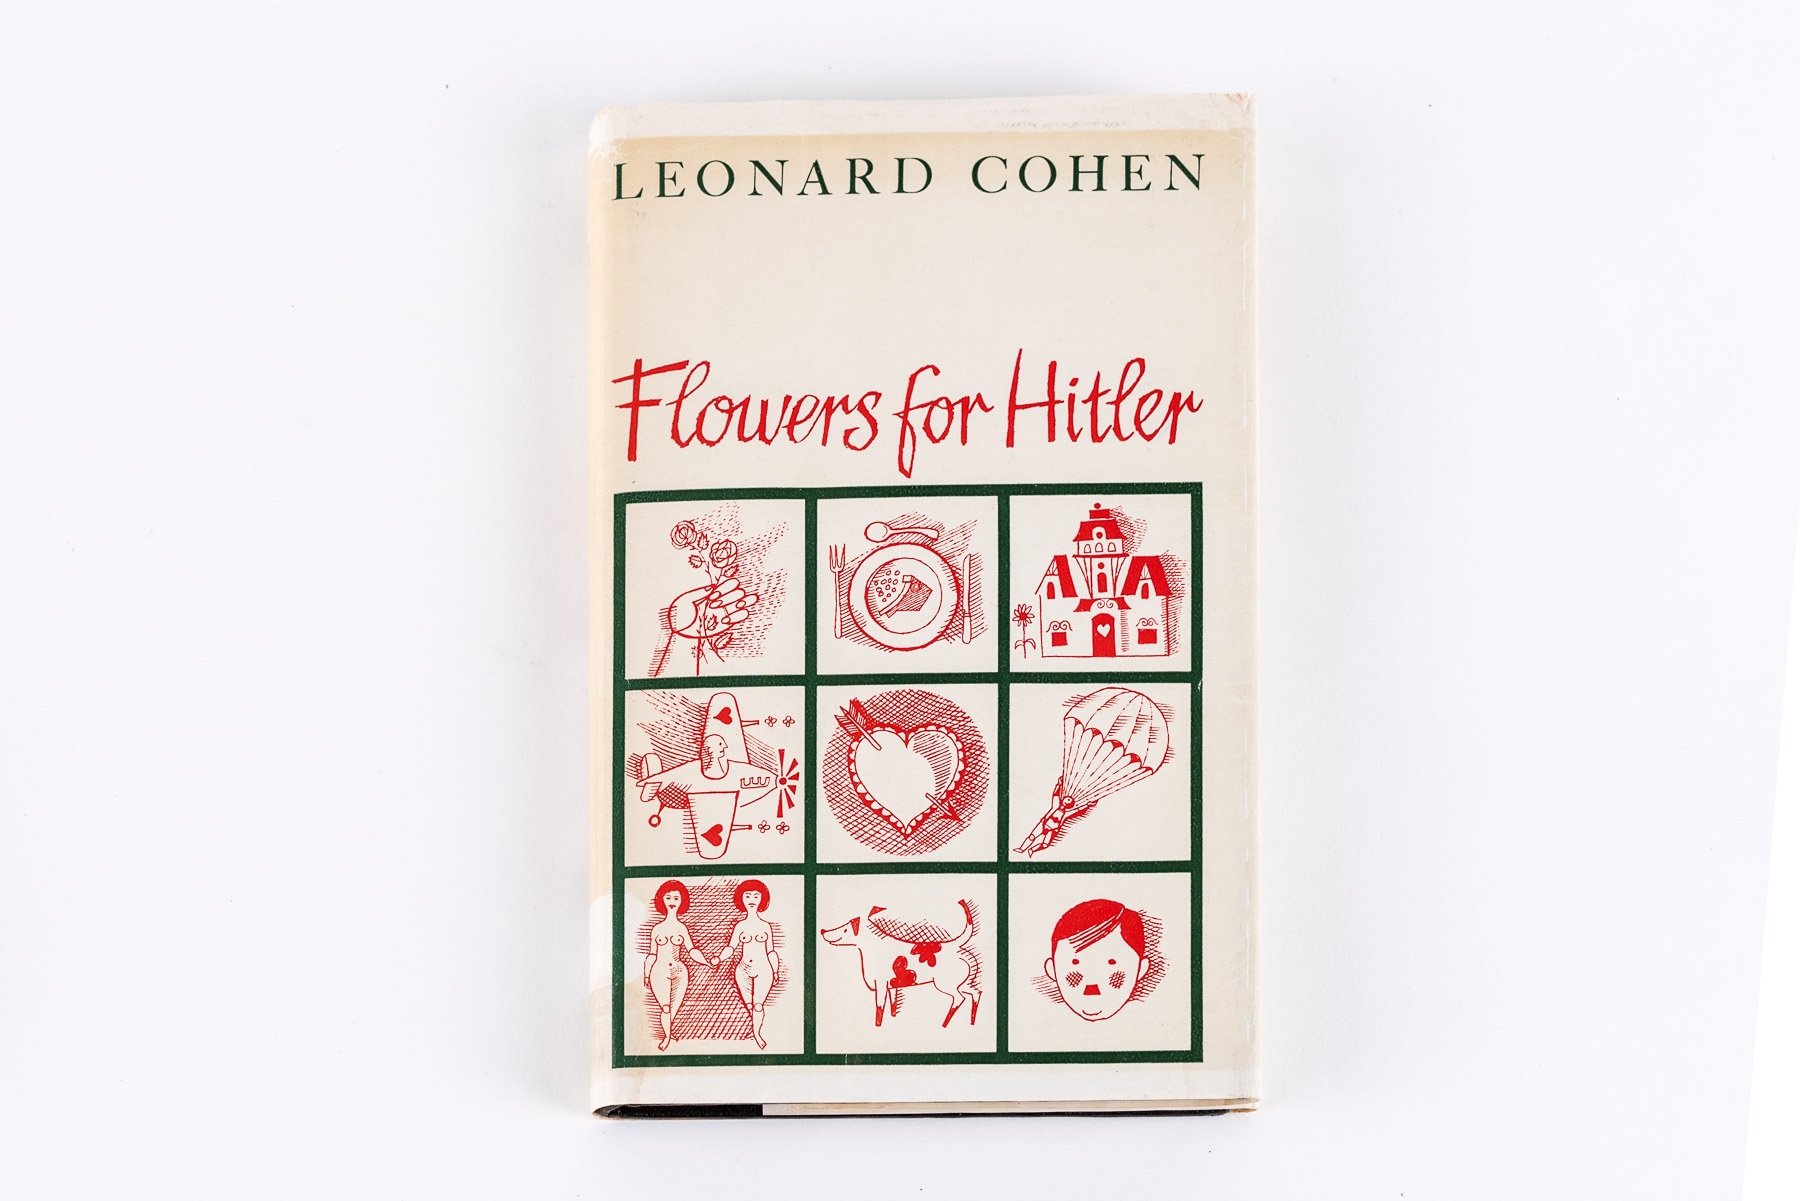 First edition of Flowers for Hitler by Leonard Cohen